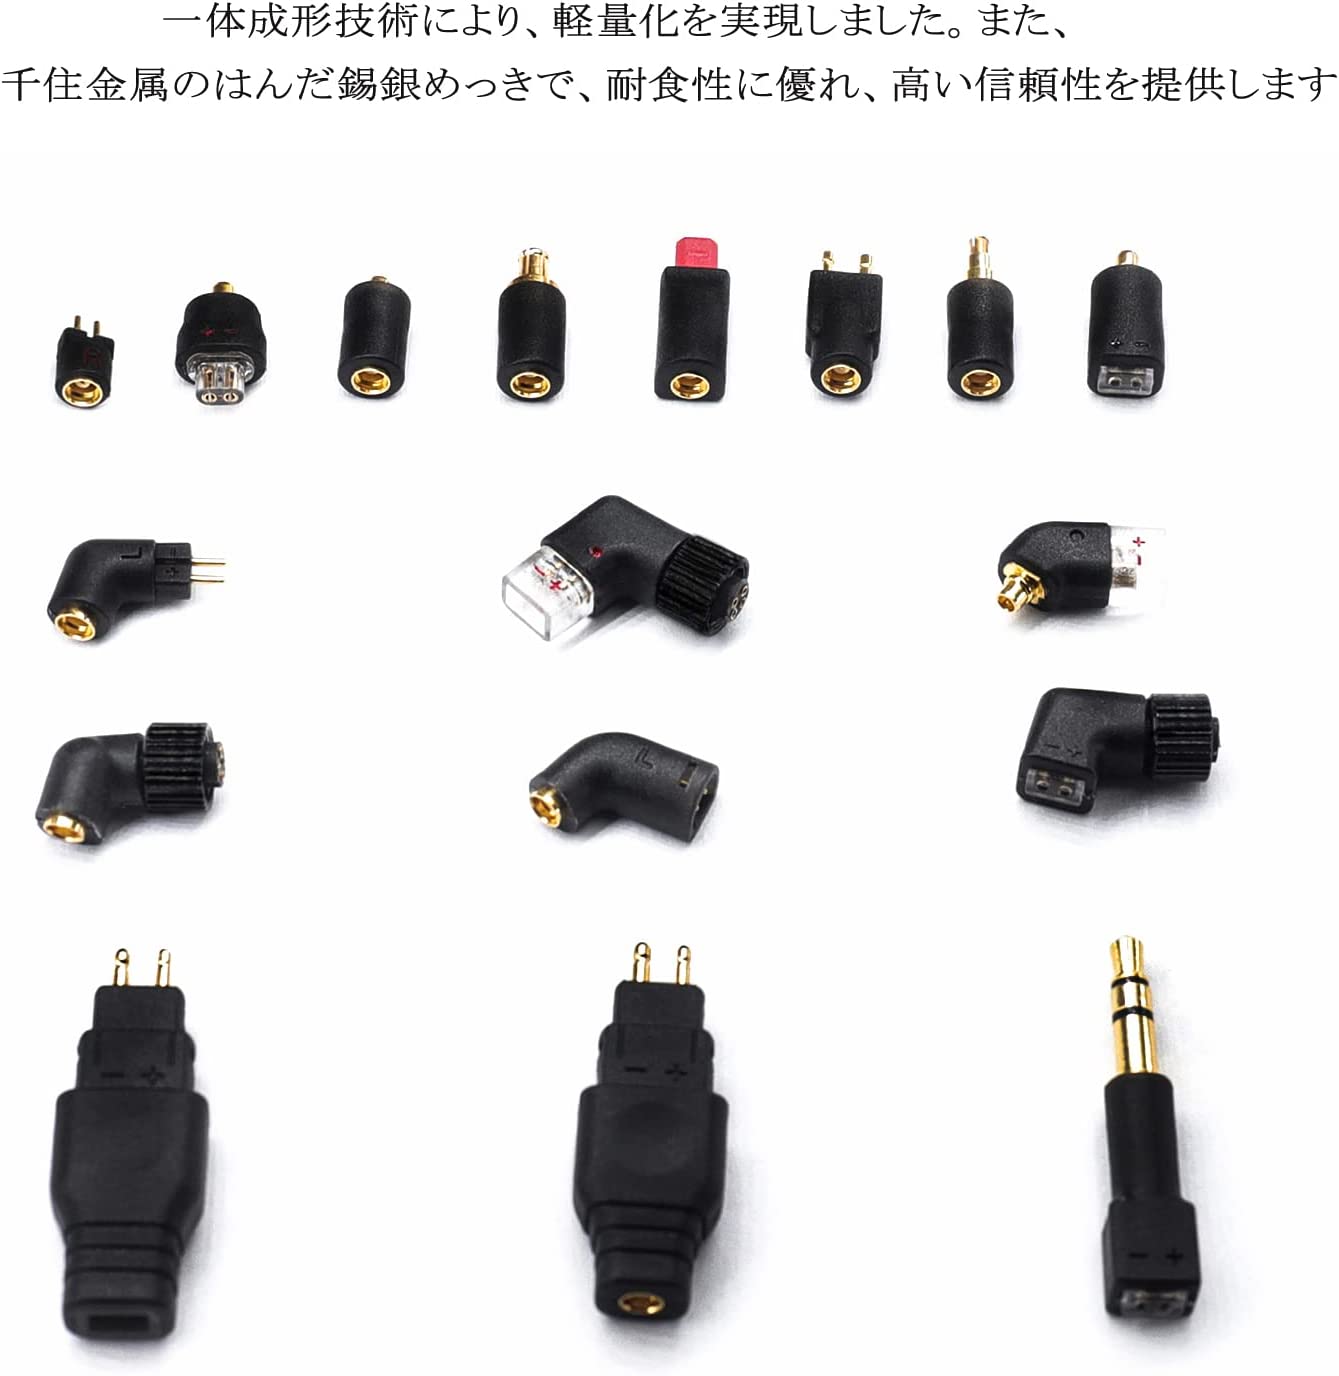 cooyin IE40-MMCX 変換コネクター コネクターキット ゼンハイザー用 IE40 Pro用（オス） to MMCXコネクタ（メス） 2個セット